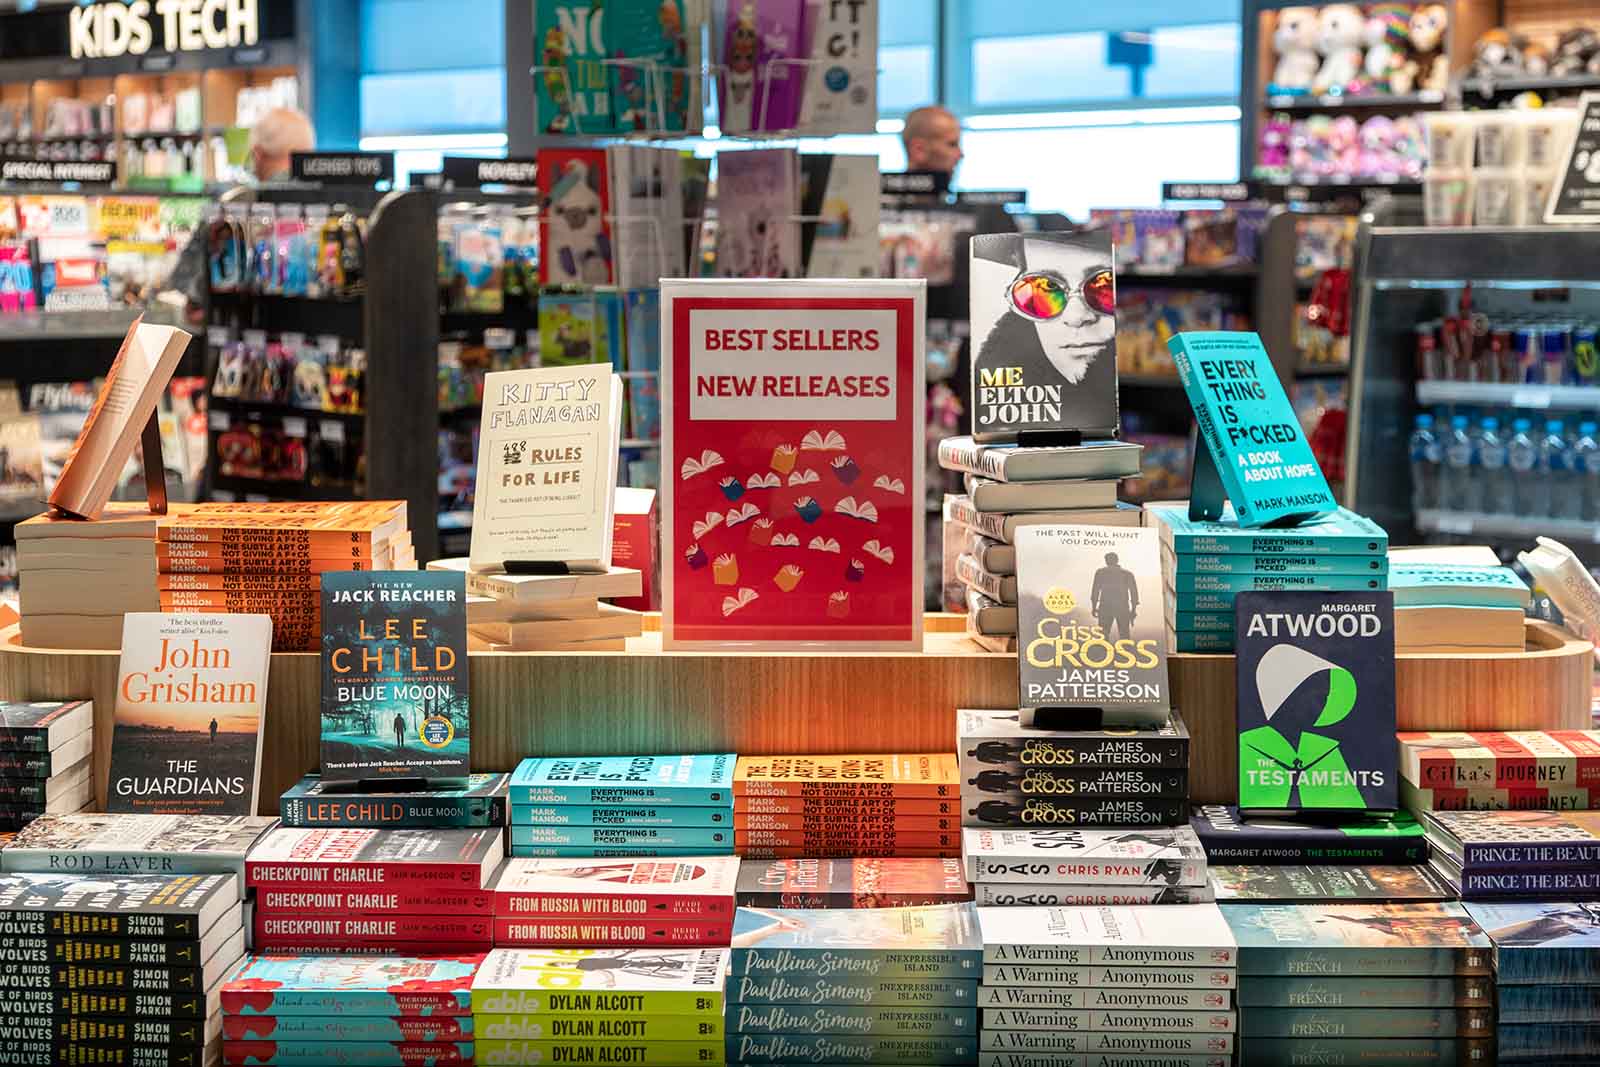 Brisbane Airport has a top selection of airport reads | Best Airport reads: Where to buy a book at Brisbane Airport